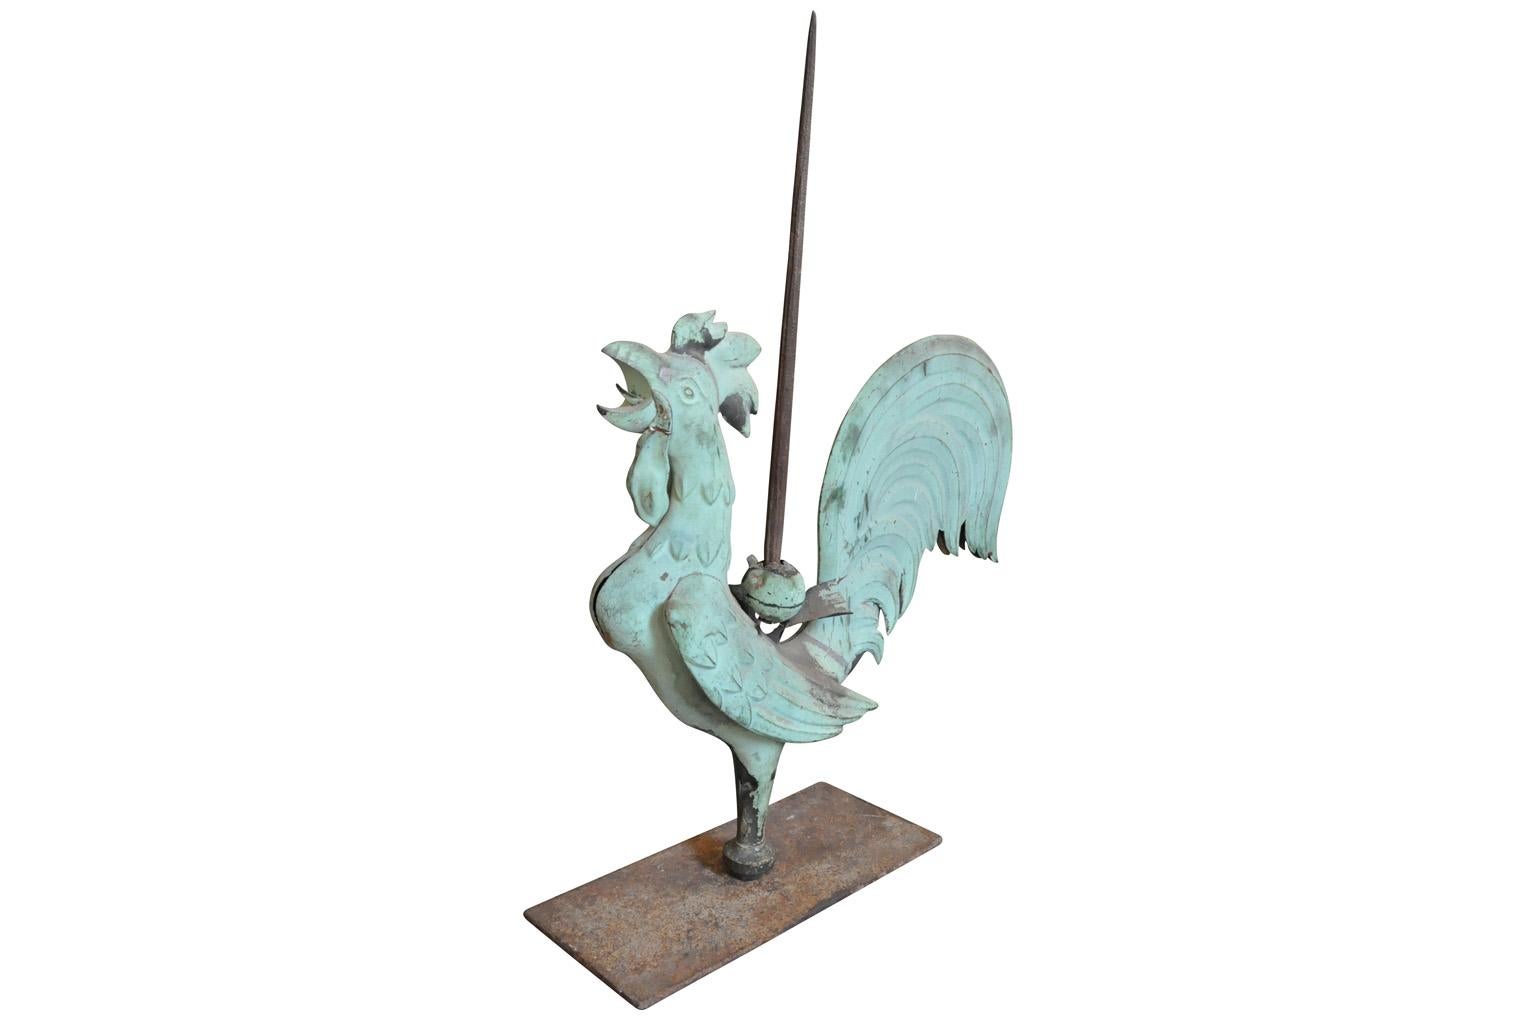 A fabulous early 18th century Girouette - Weathervane from Provence, France. This terrific Arte Populaire - Folk Art piece is beautifully crafted from copper and is now mounted on its iron stand.